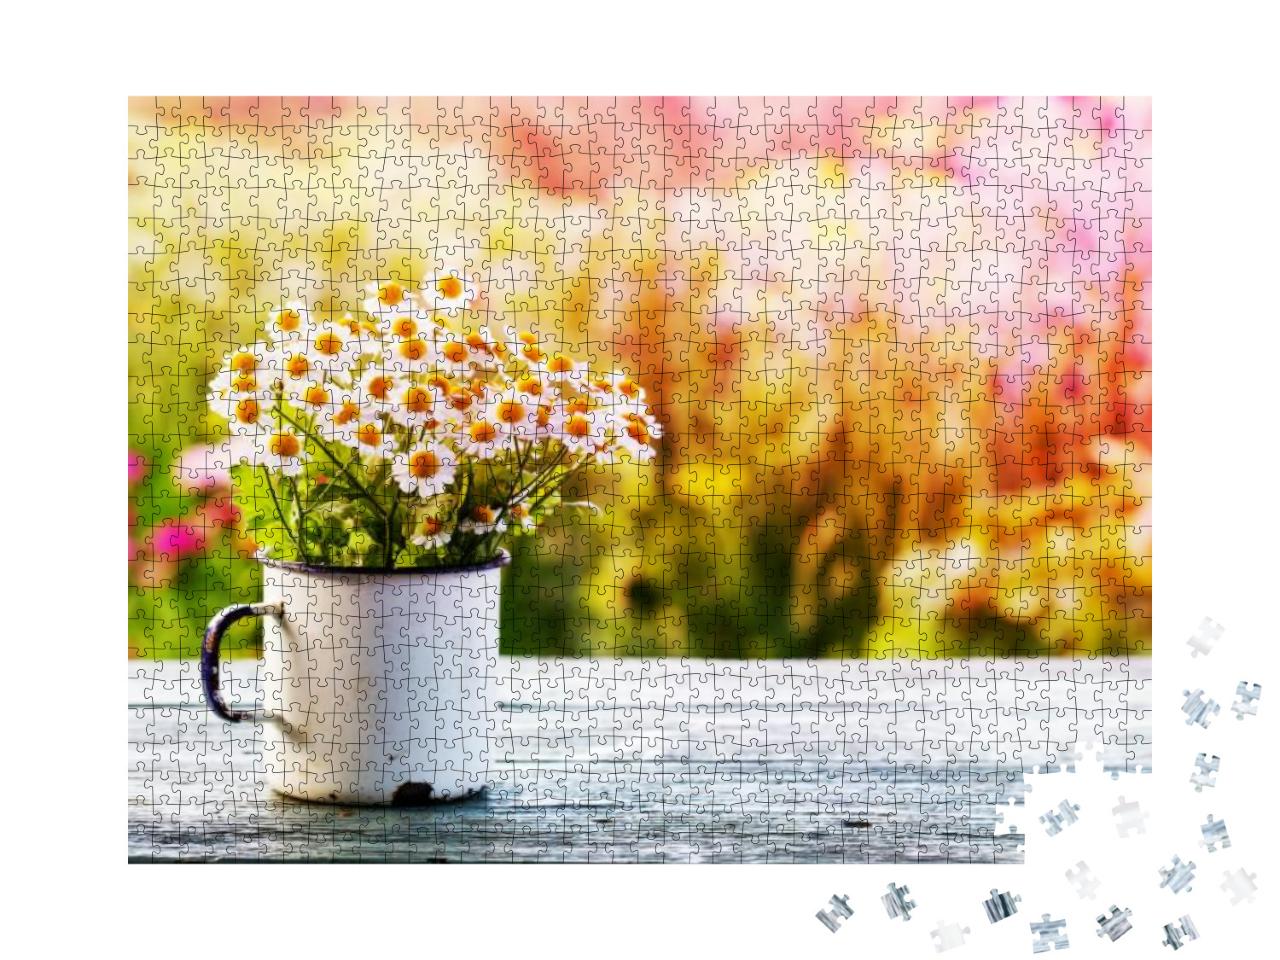 Summer or Spring Beautiful Garden with Daisy Flowers... Jigsaw Puzzle with 1000 pieces